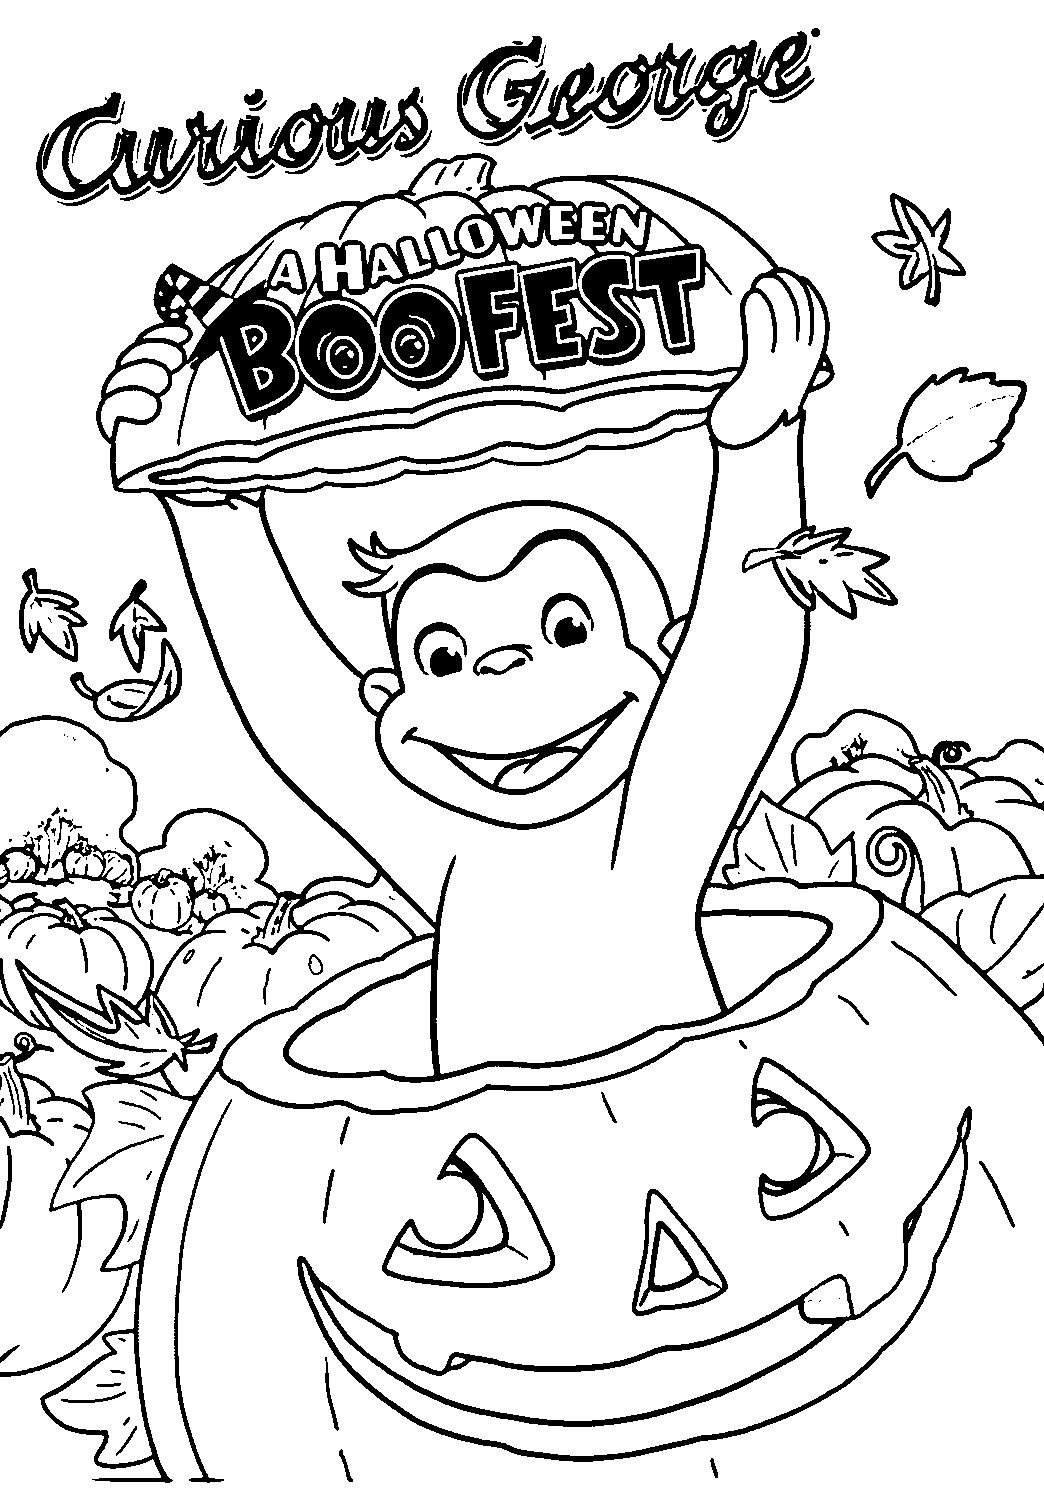 Curious A Halloween Boofest Coloring Page Wecoloringpage